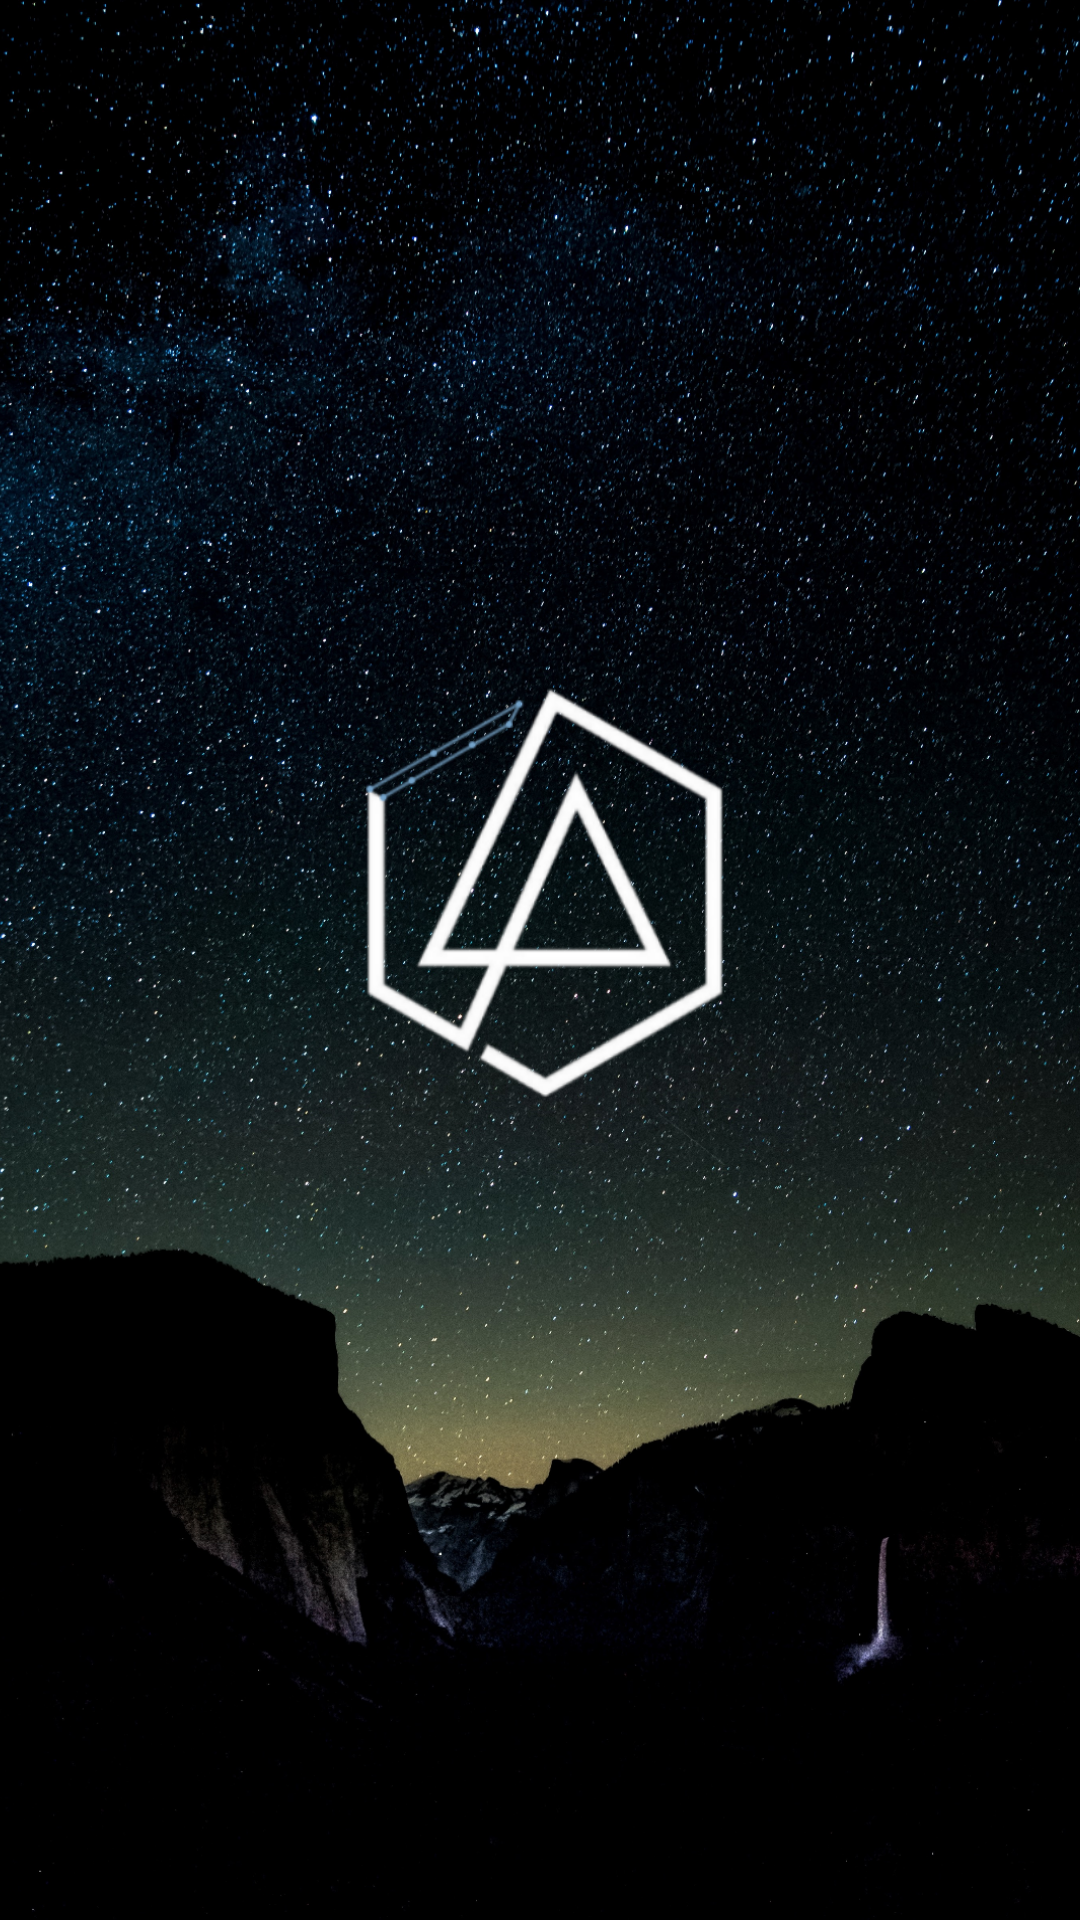 Iphone Wallpaper Version Of My Previous Wallpaper Version - Linkin Park 4k Wallpaper Phone , HD Wallpaper & Backgrounds